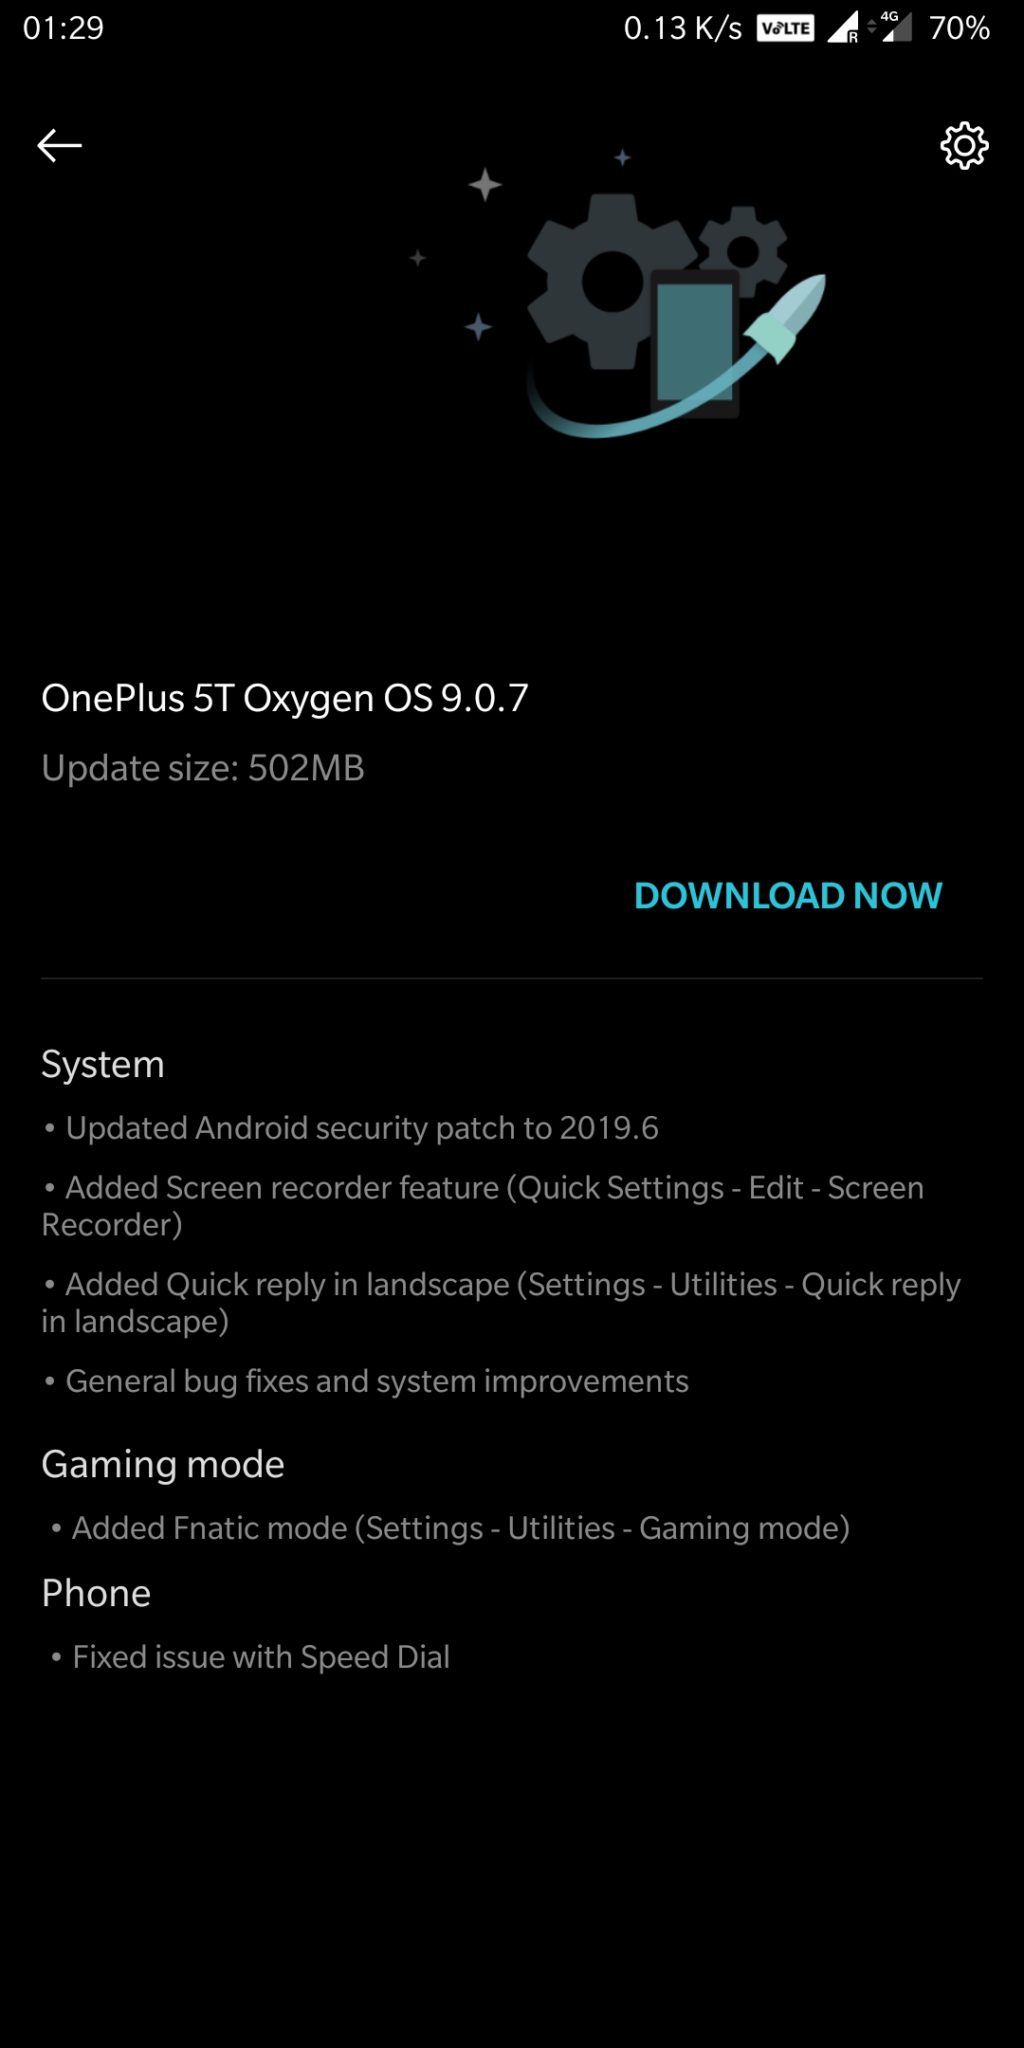 Very recently, OnePlus has released new Oxygen OS 9.0.7 update on OnePlus 5T/5 mobile phones in India - Security Patch, Native Screen Recorder, and More